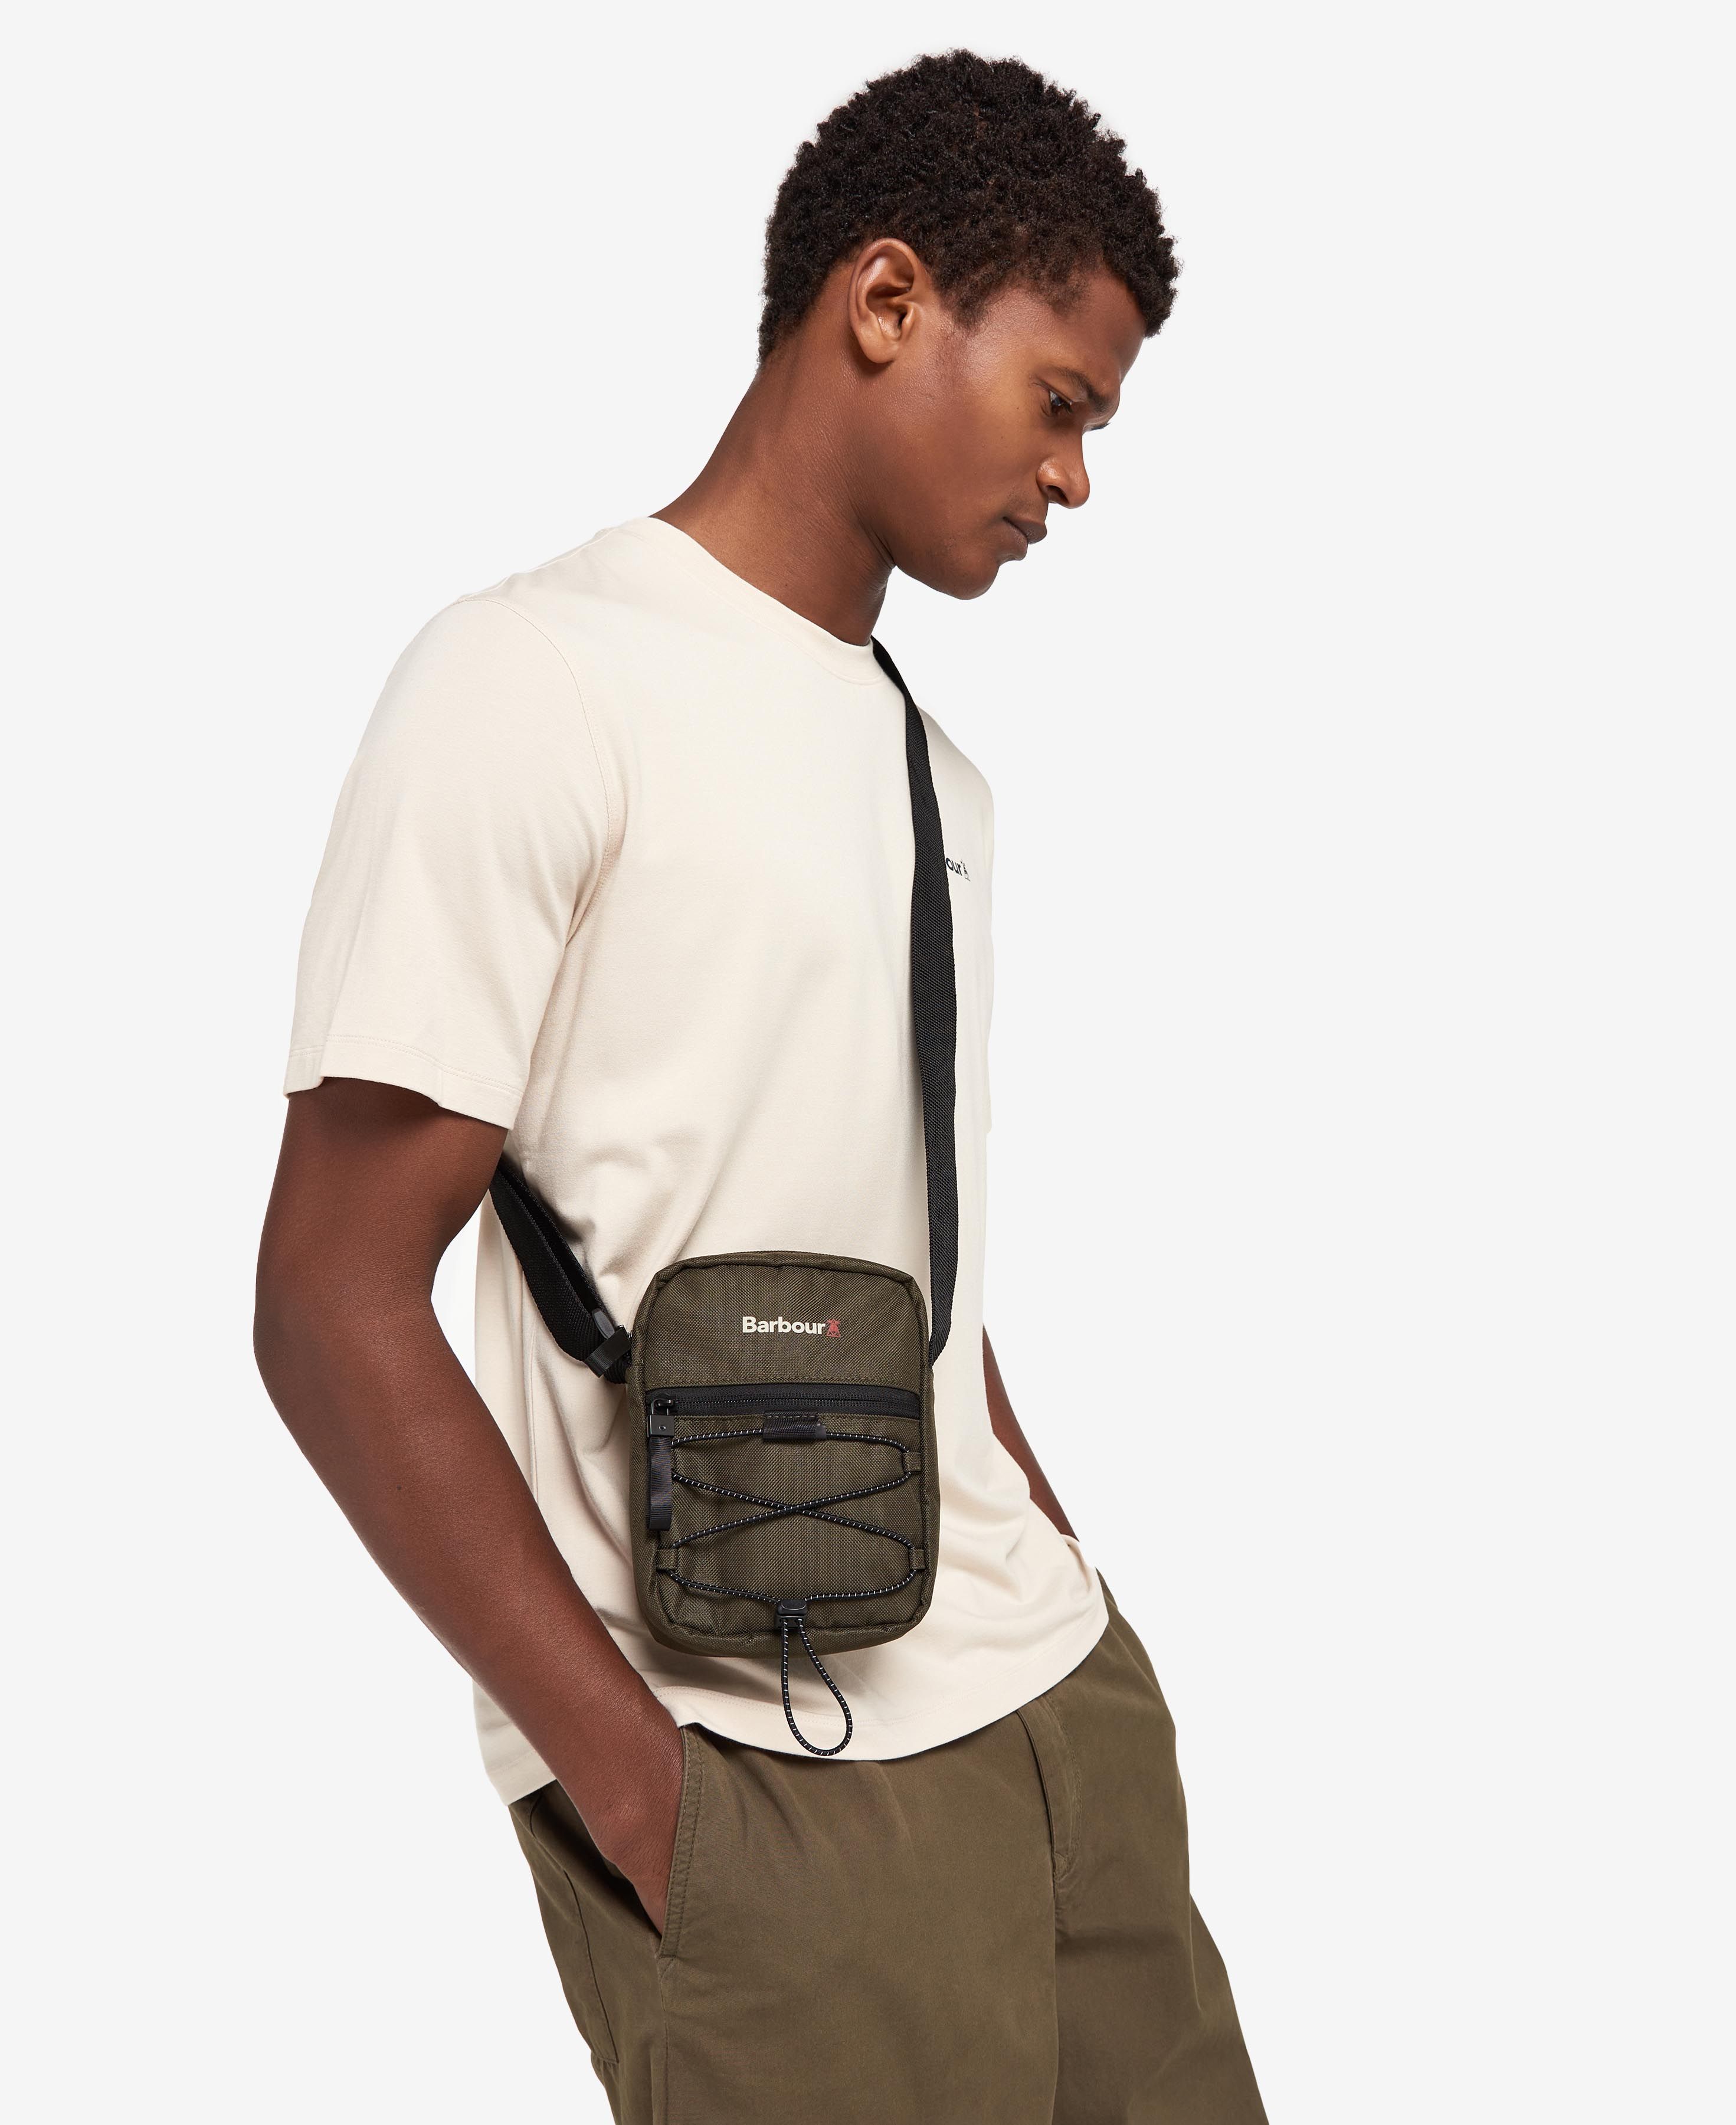 Shop the Barbour Arwin Canvas Crossbody Bag today. | Barbour